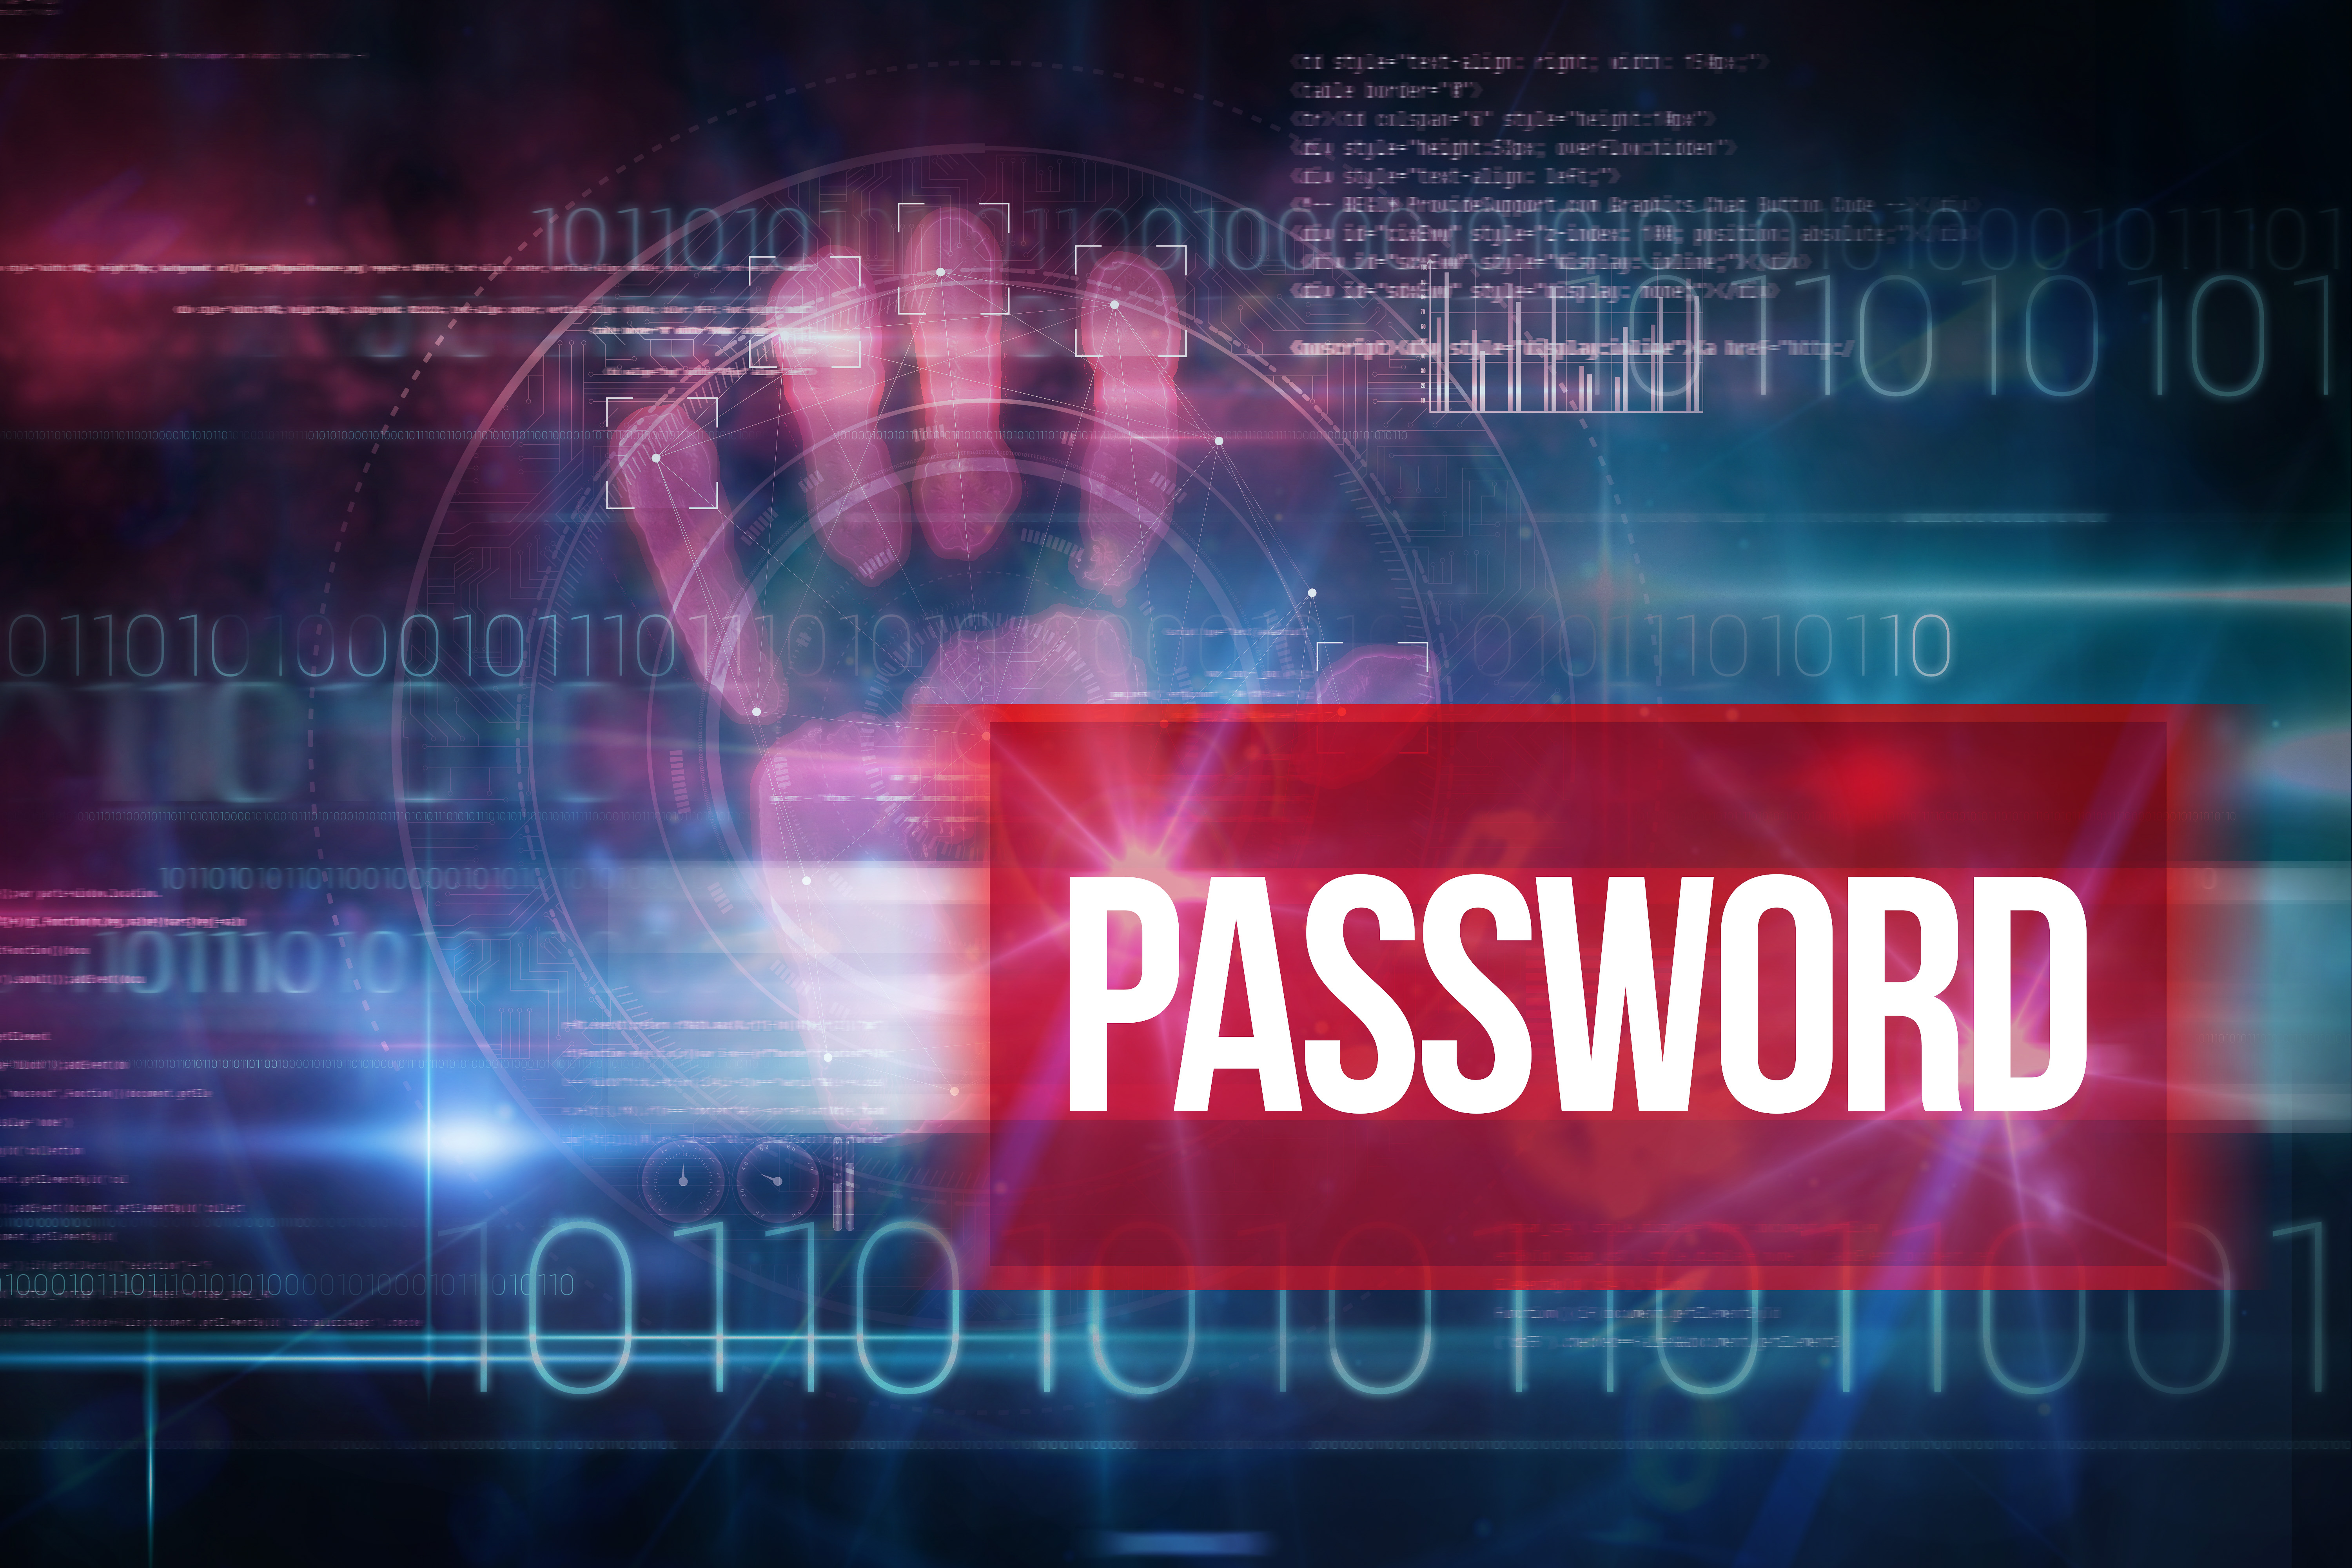 What’s Your Password: How to Properly Manage Your Many Passwords